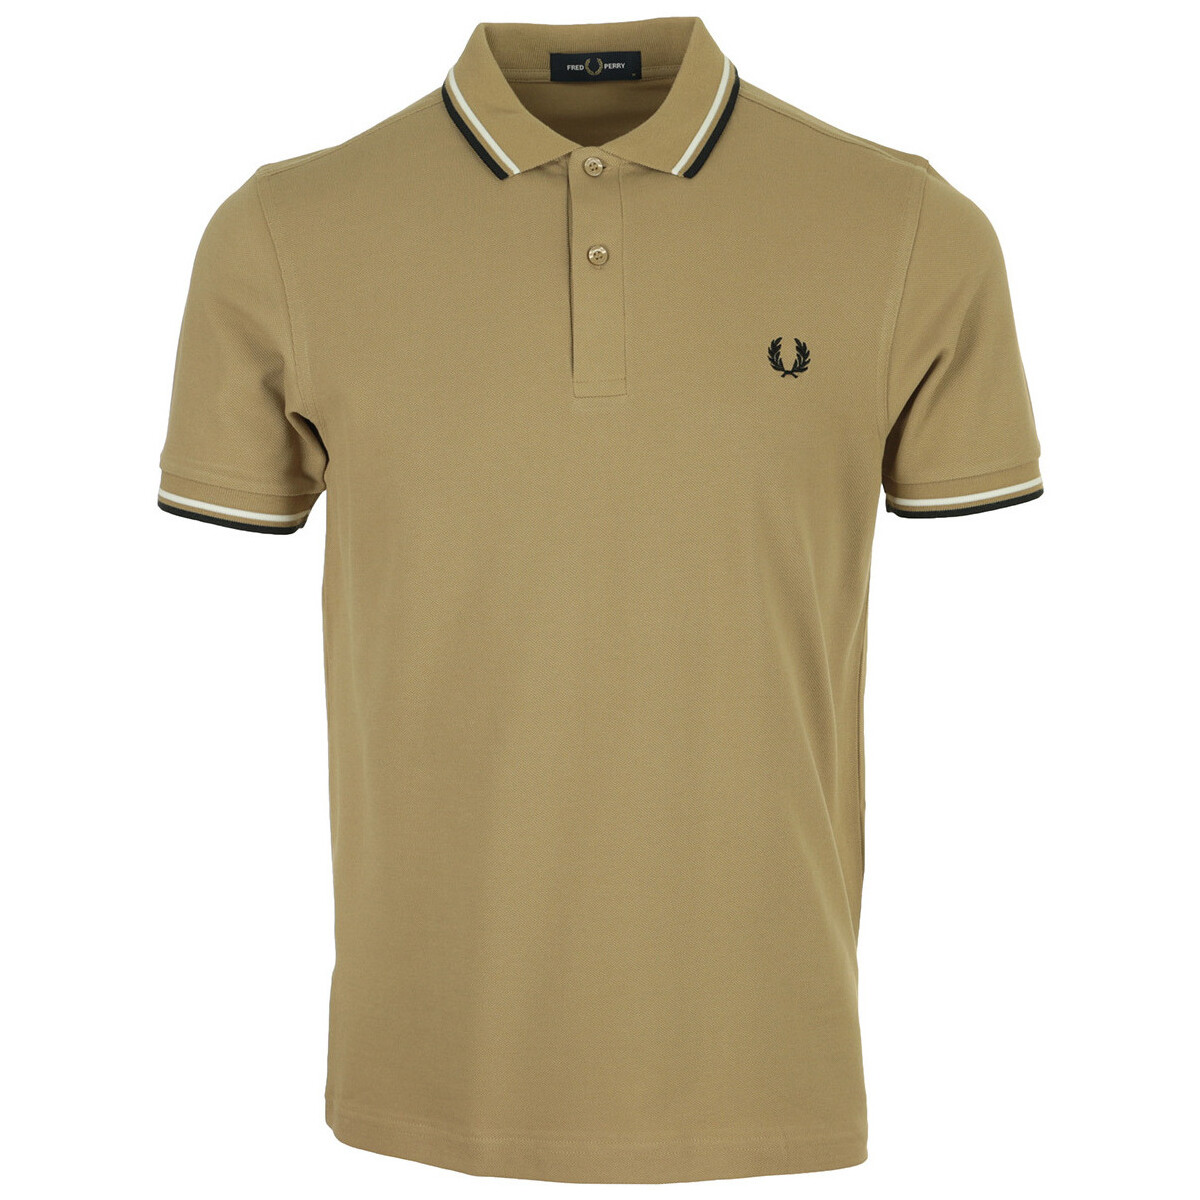 Textiel Heren T-shirts & Polo’s Fred Perry Twin Tipped Shirt Brown